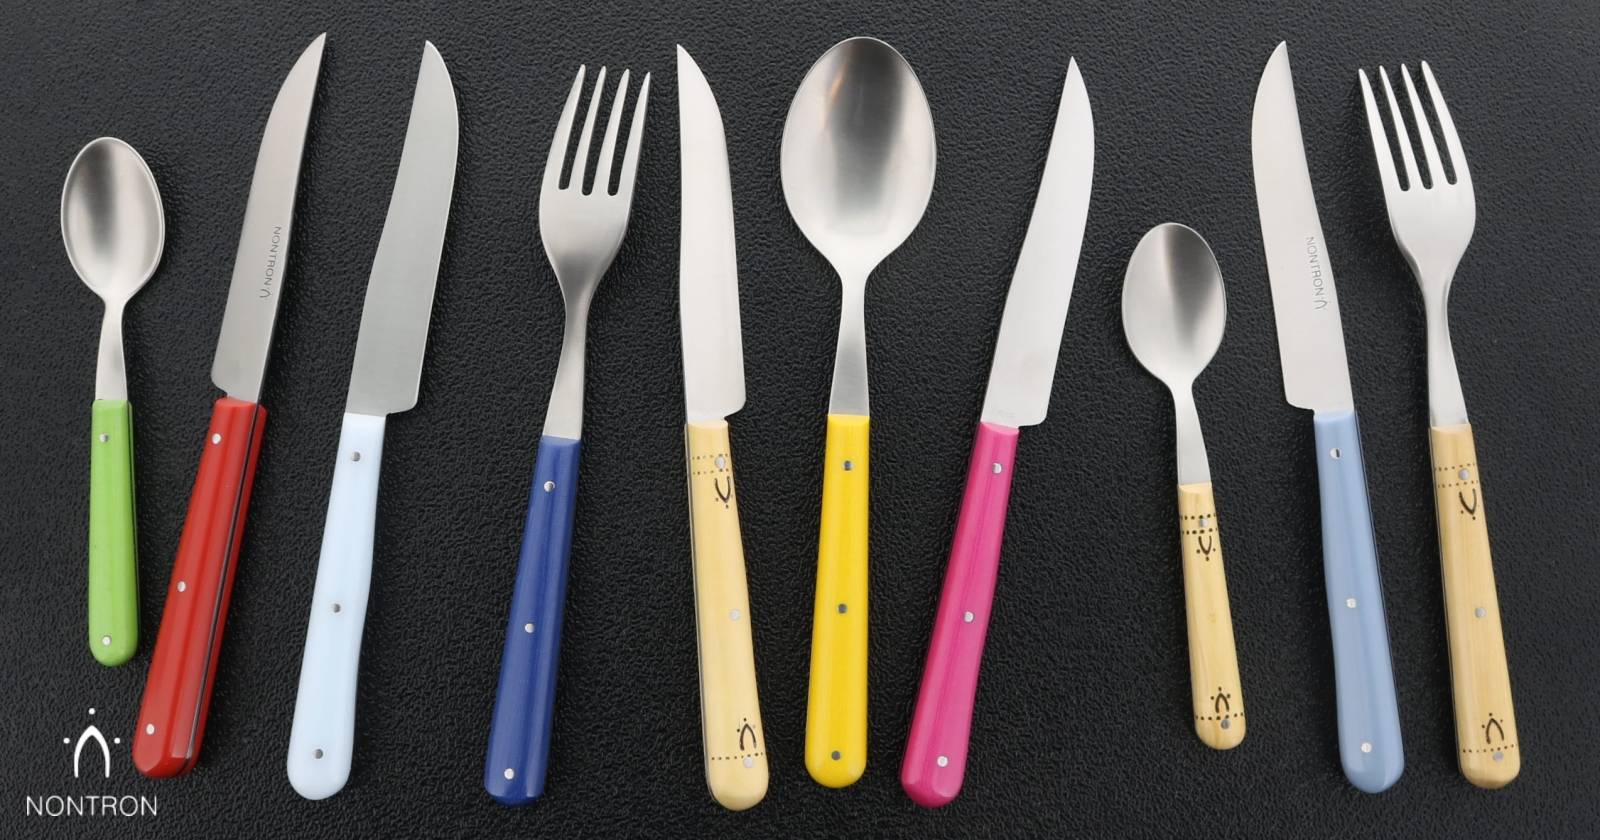 nontron cutlery spoon knife and forks in several colors - wood yellow red, light blue, dark blue, pink